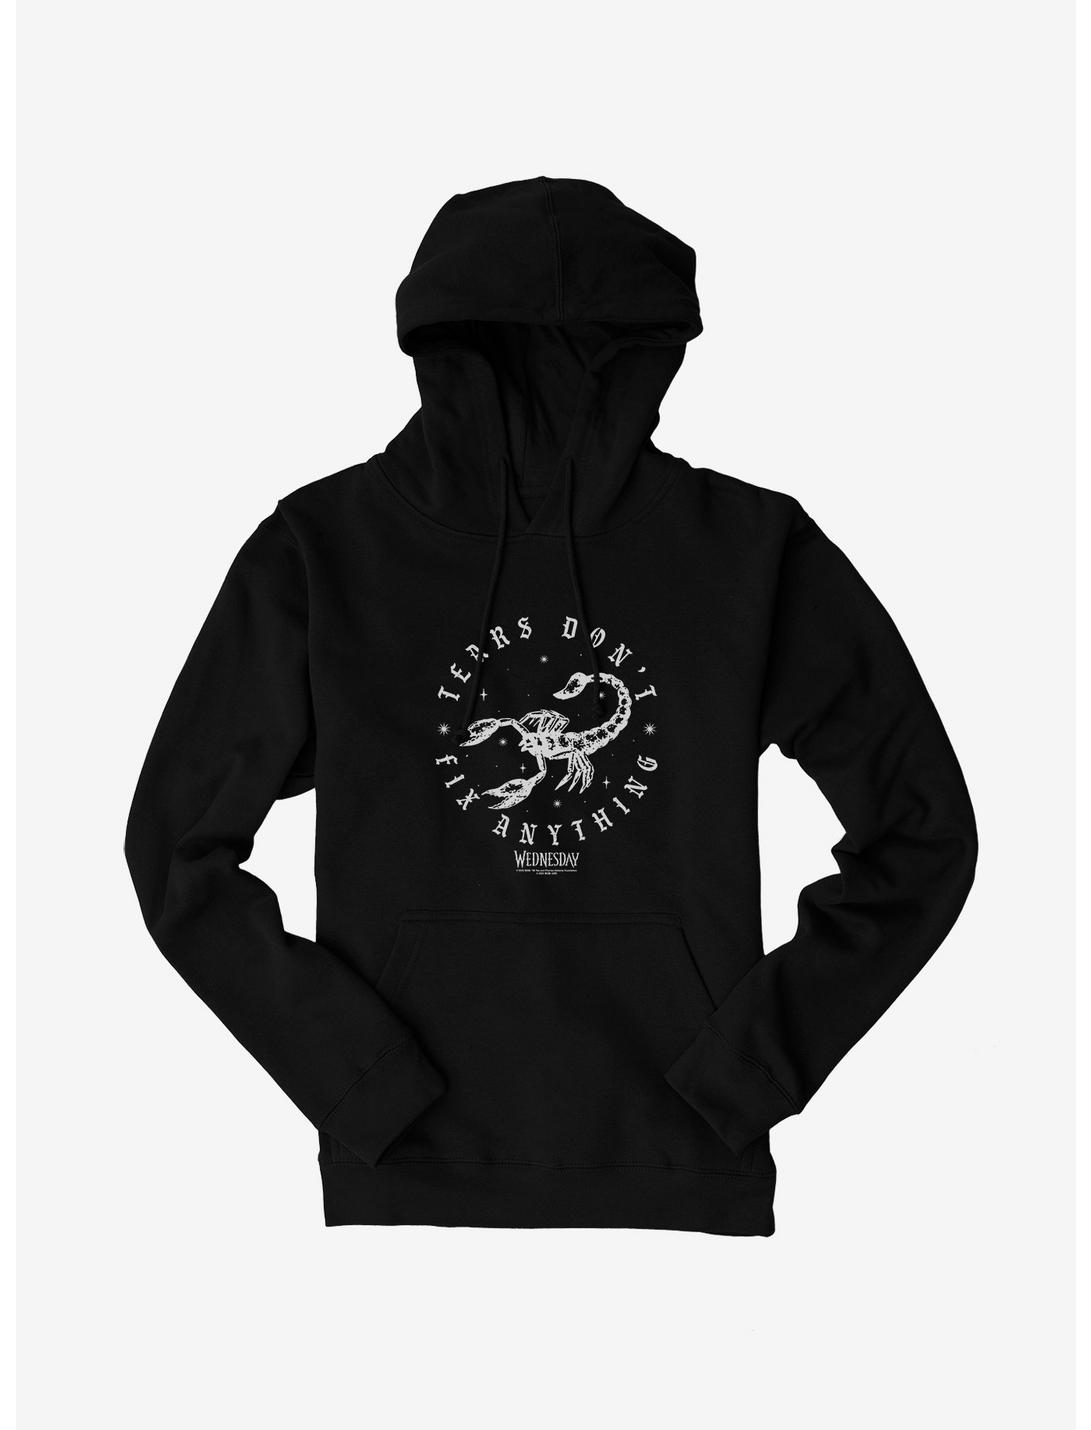 Wednesday Tears Don't Fix Anything Hoodie, BLACK, hi-res